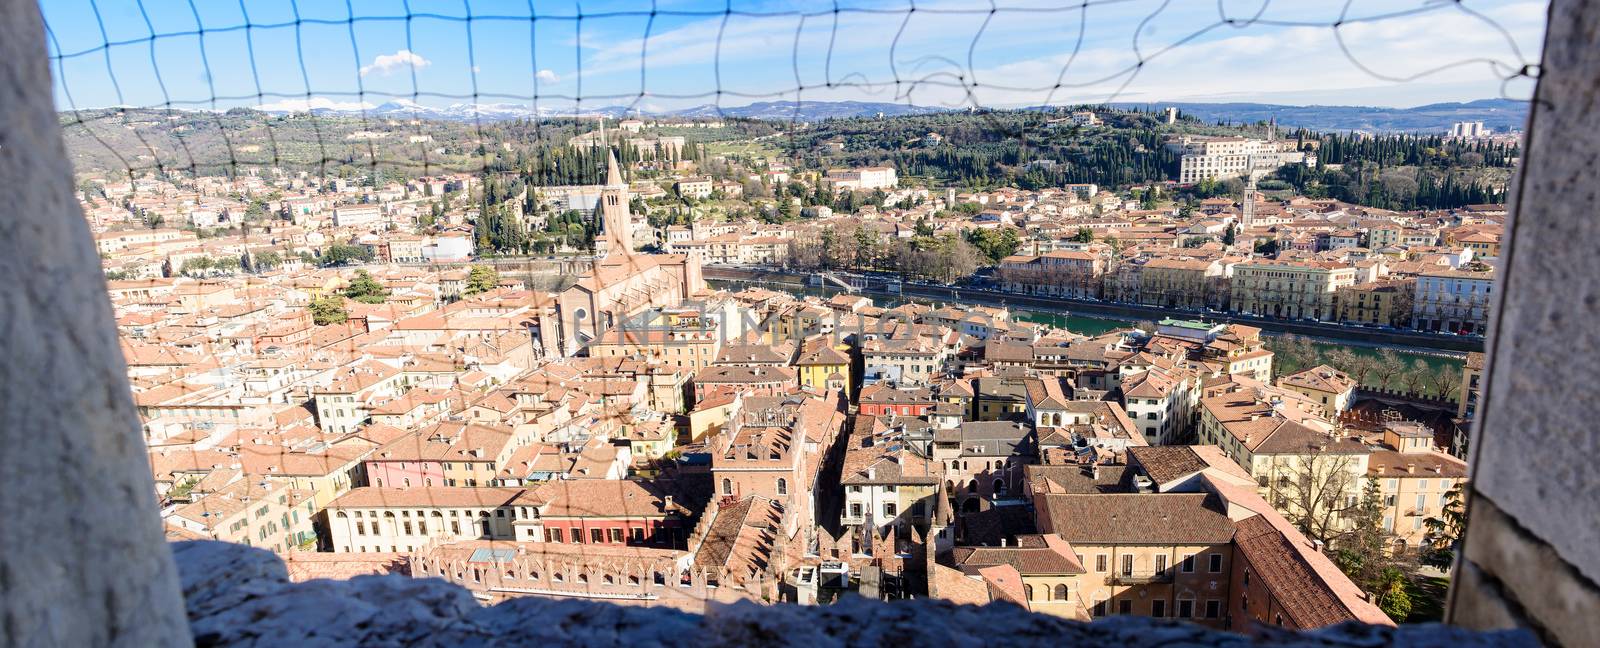 Panoramic view of the historic center of Verona, via a net in the window of the Torre dei Lamberti tower, in Verona, Veneto, Italy